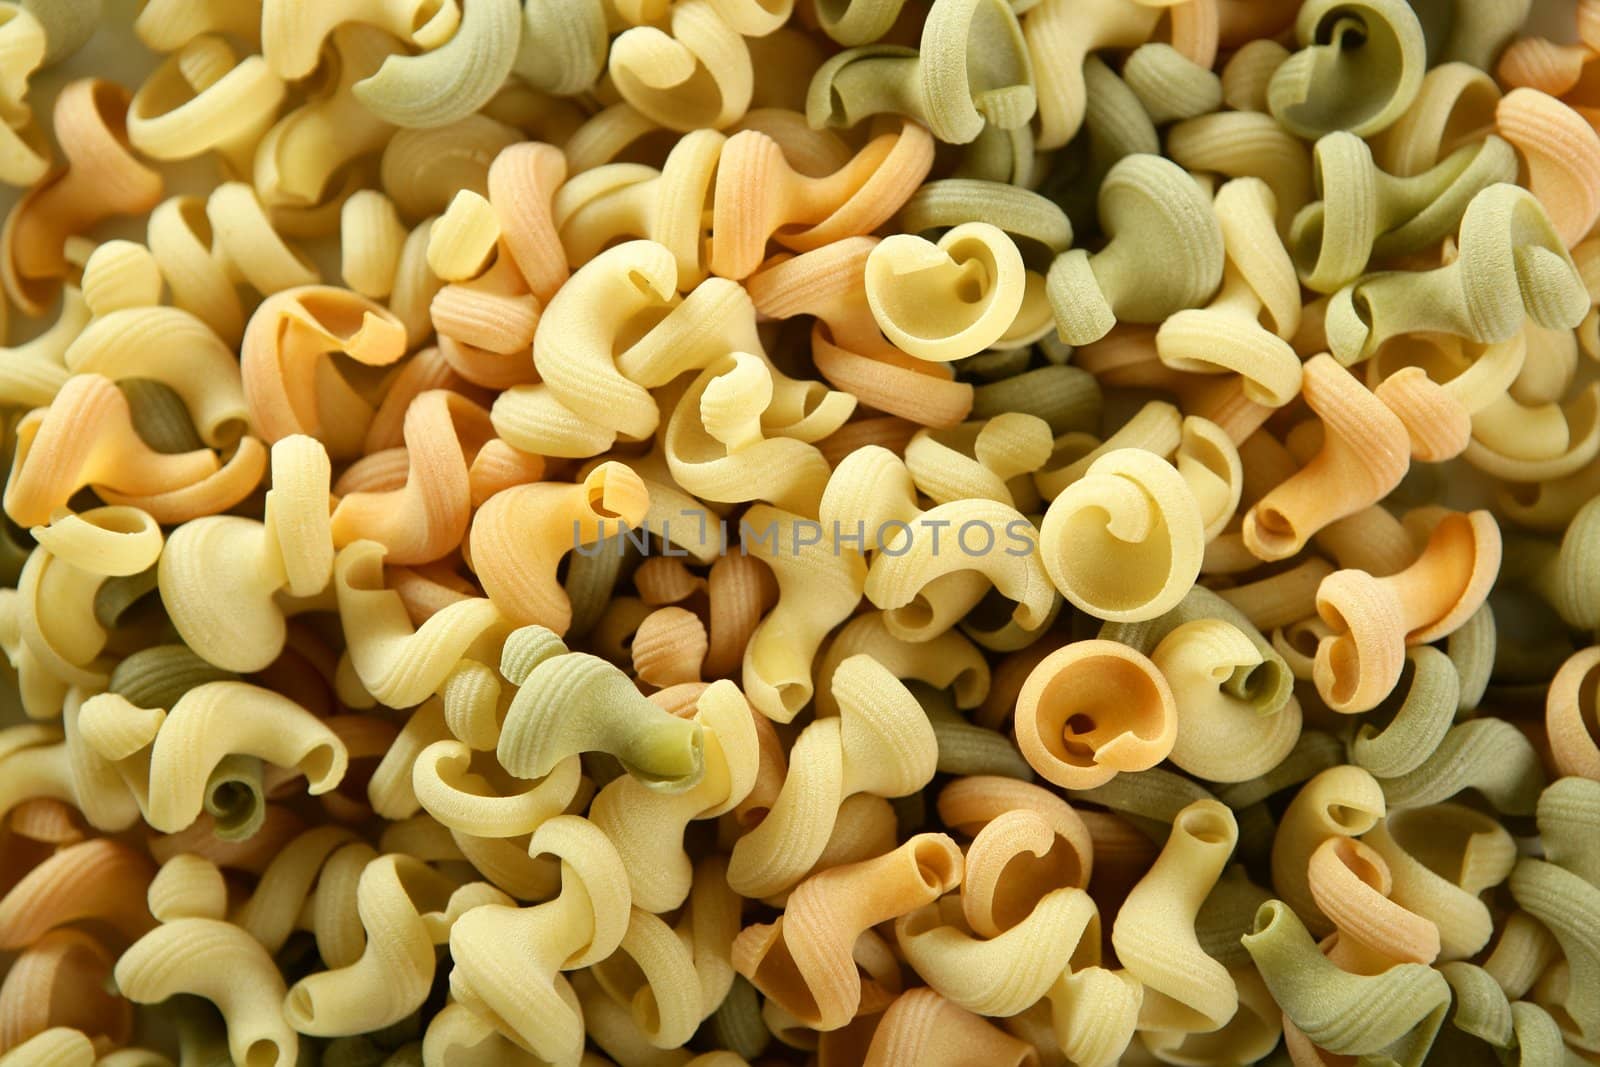 Twisty snail shape, Italian multicolor pasta texture, good for background